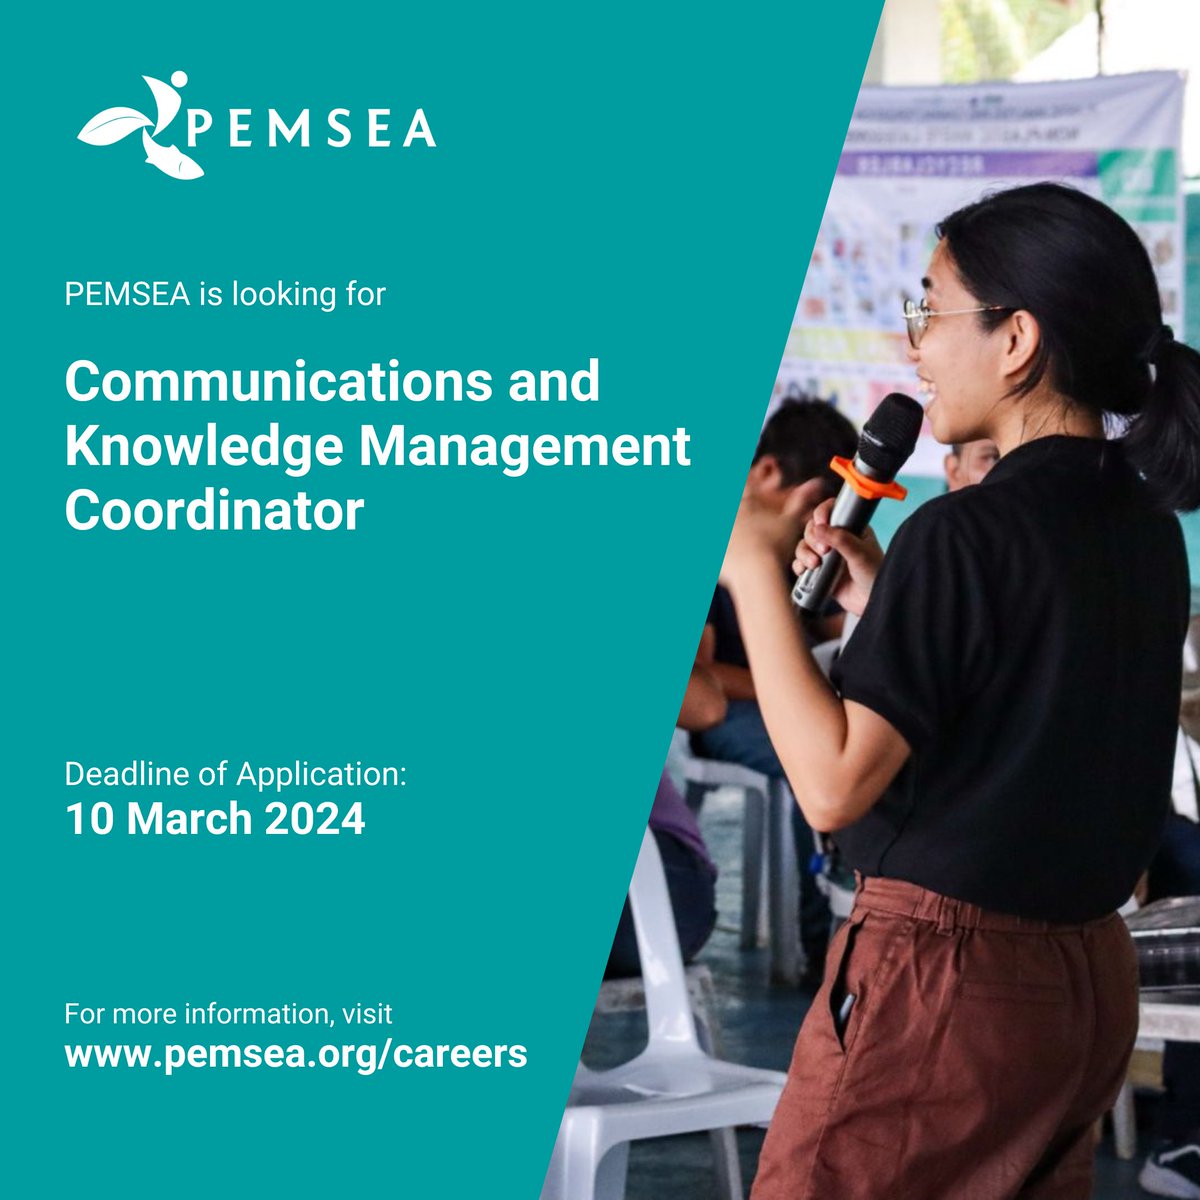 📣 @PEMSEA is hiring a 𝐂𝐨𝐦𝐦𝐮𝐧𝐢𝐜𝐚𝐭𝐢𝐨𝐧𝐬 𝐚𝐧𝐝 𝐊𝐧𝐨𝐰𝐥𝐞𝐝𝐠𝐞 𝐌𝐚𝐧𝐚𝐠𝐞𝐦𝐞𝐧𝐭 𝐂𝐨𝐨𝐫𝐝𝐢𝐧𝐚𝐭𝐨𝐫‼️ If you're a young professional with good vision on strategic communication💡 & organizing events🗣 for our ocean🌊, apply now to bit.ly/pemseacareers.